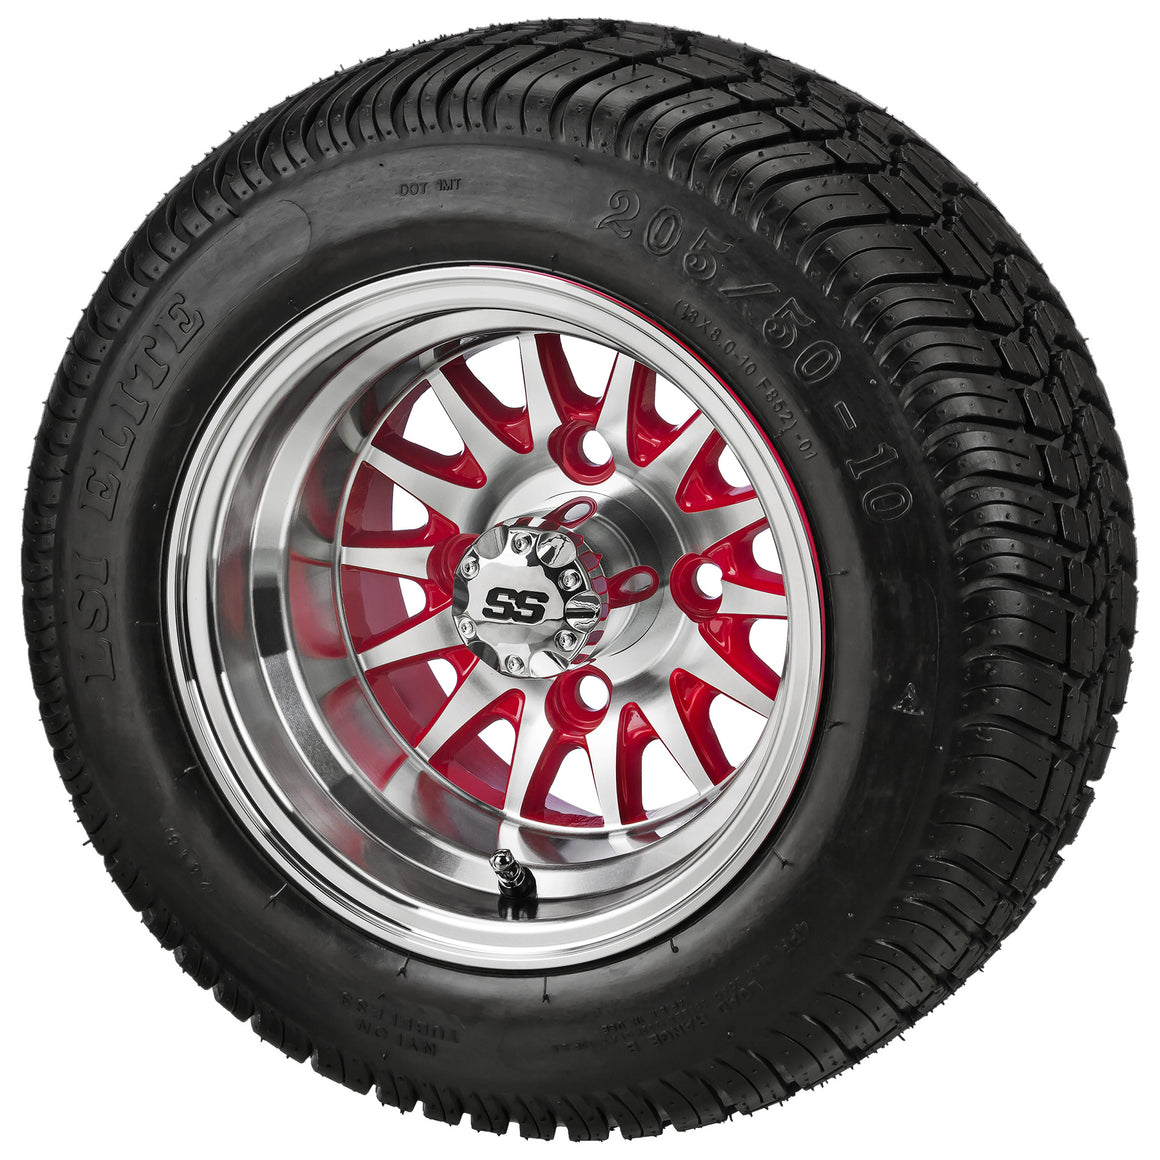 14-Spoke Red & Machined on 205/50-10 Low Pro Tire